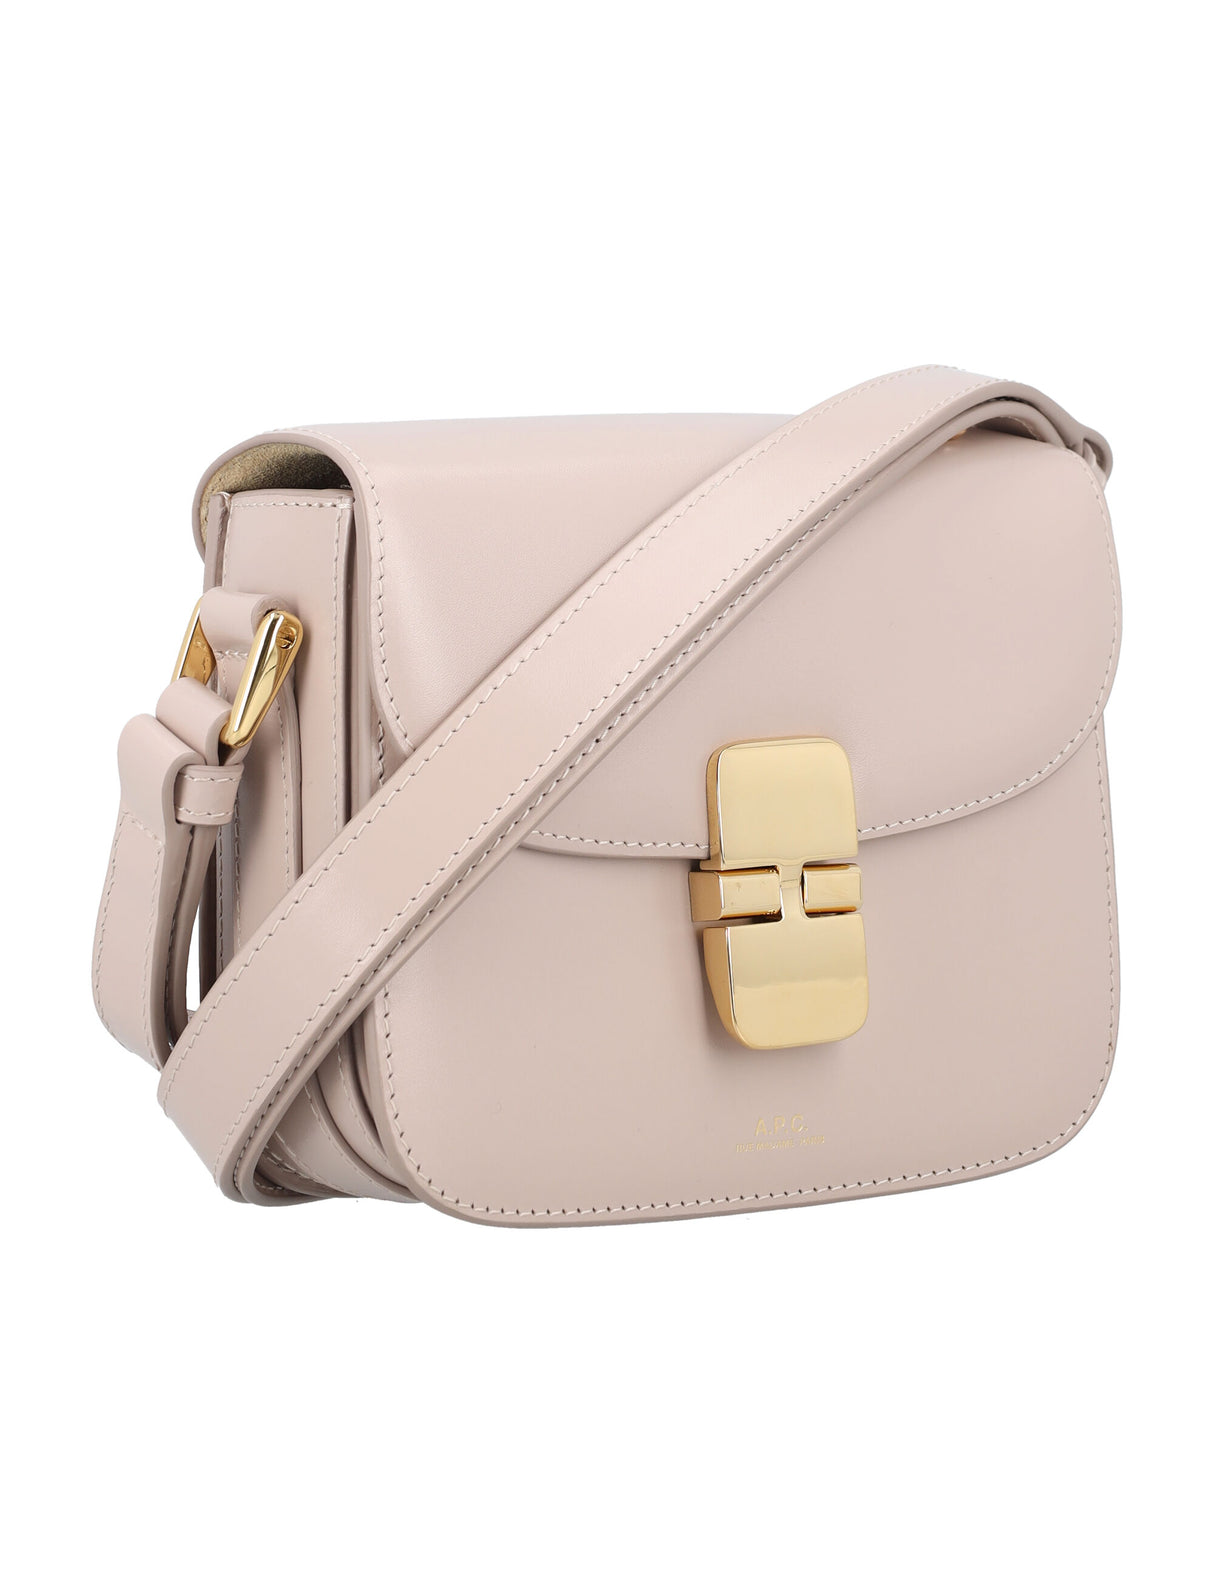 A.P.C. Grace Mini Smooth Leather Crossbody Bag in Moon Grey